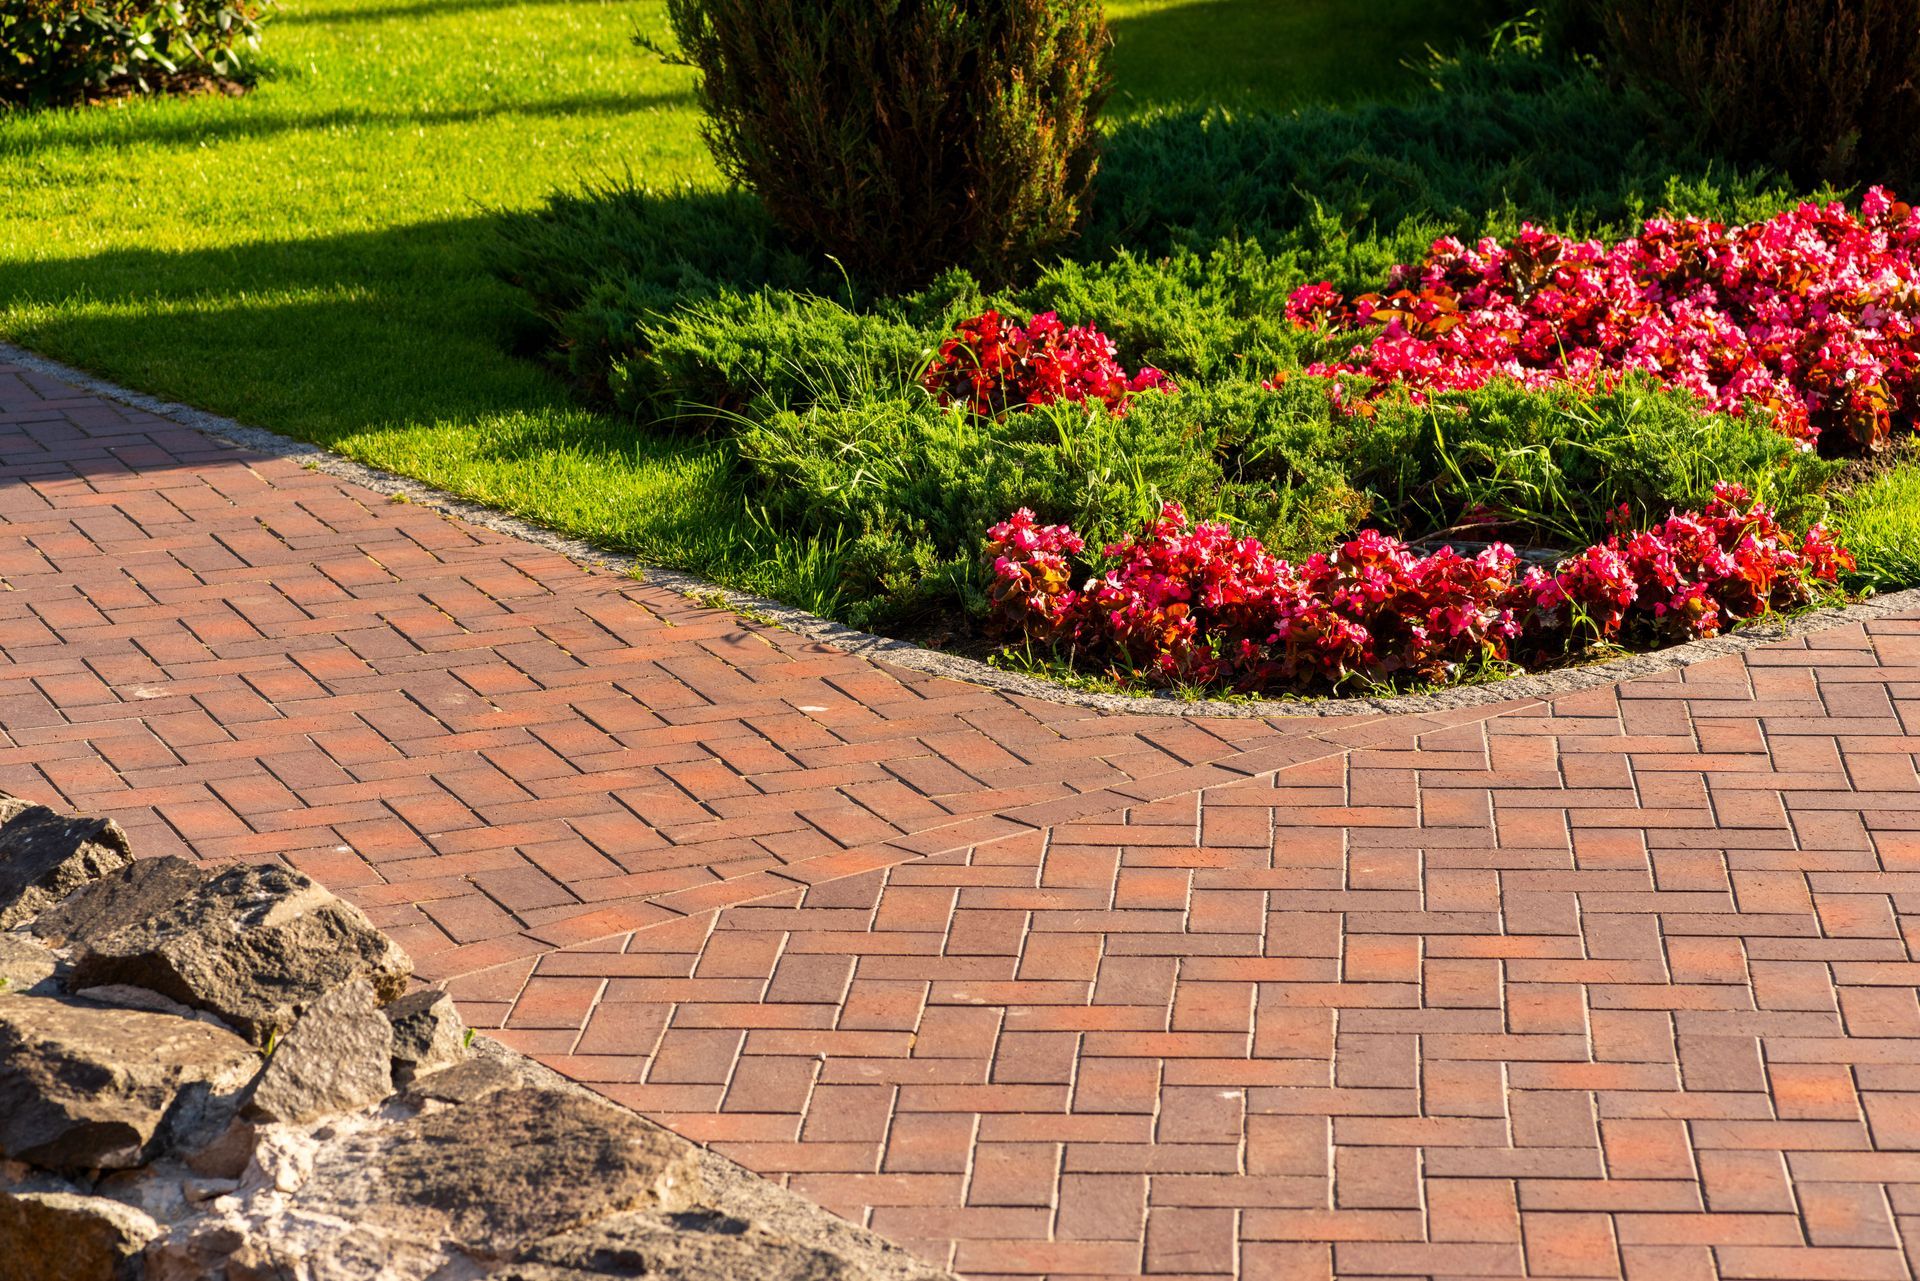 Red paving slab path winding through a garden with vibrant flowers in landscape design.